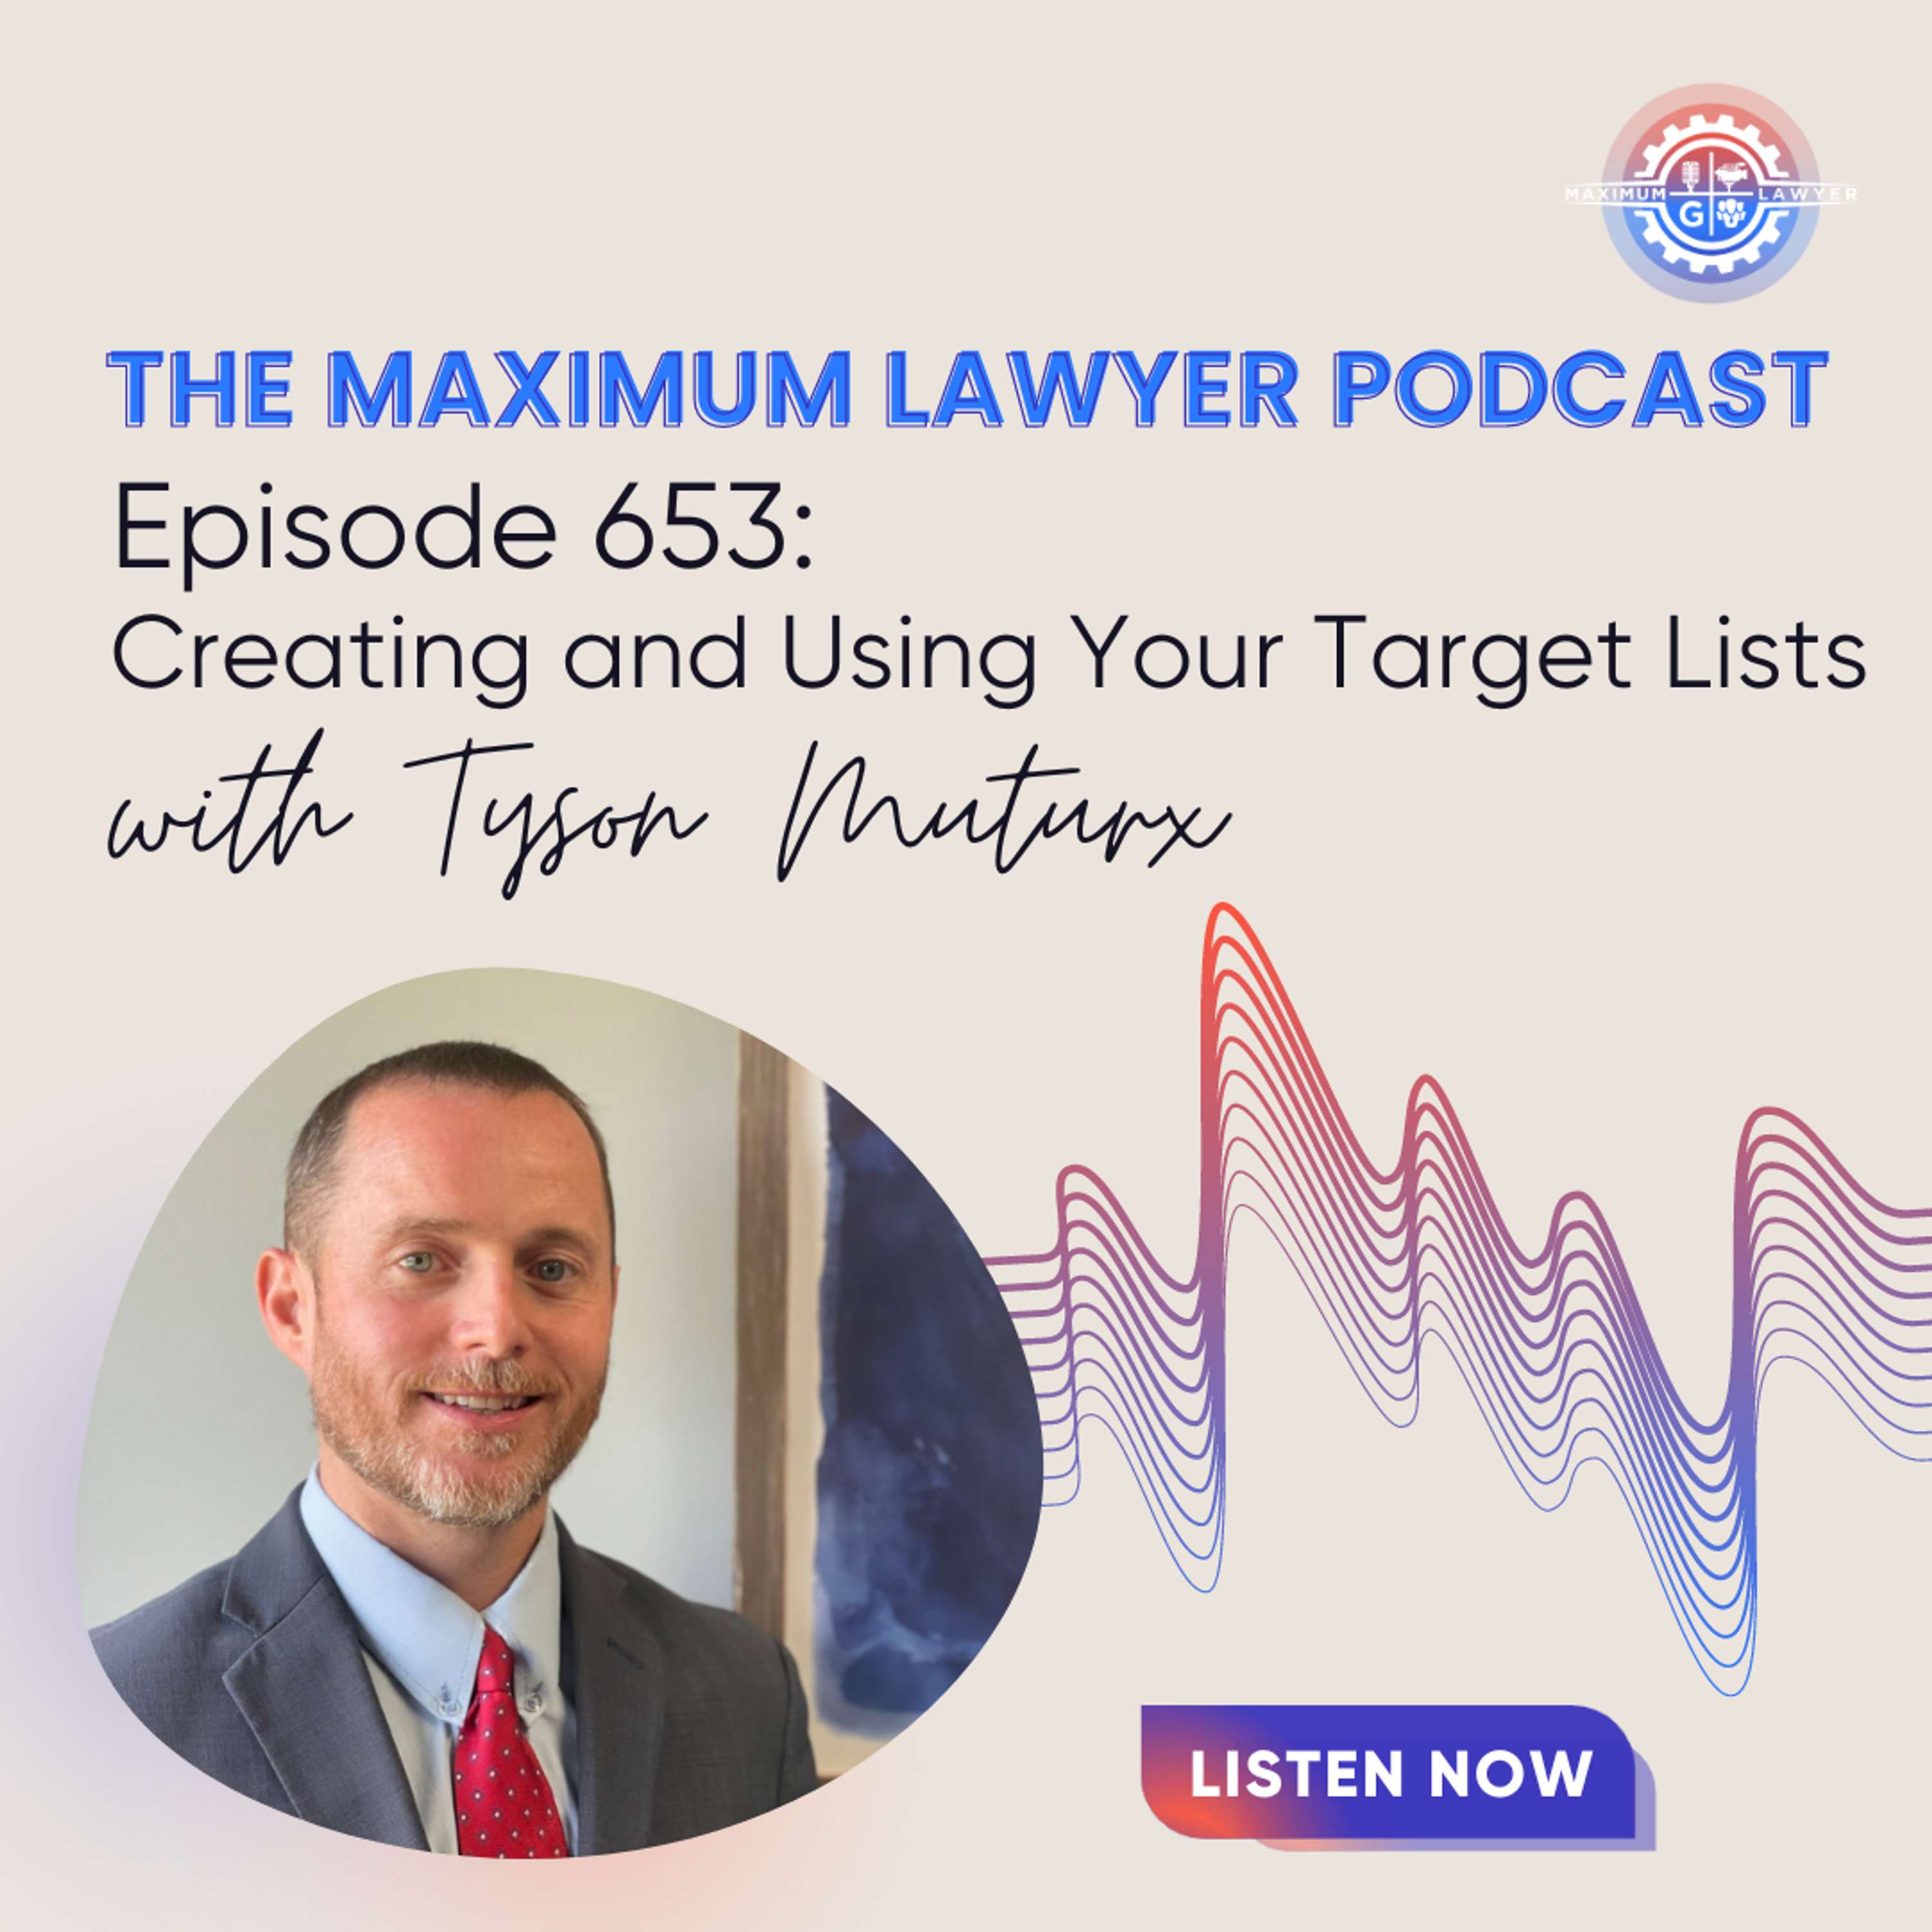 Creating and Using Your Target Lists with Tyson Mutrux